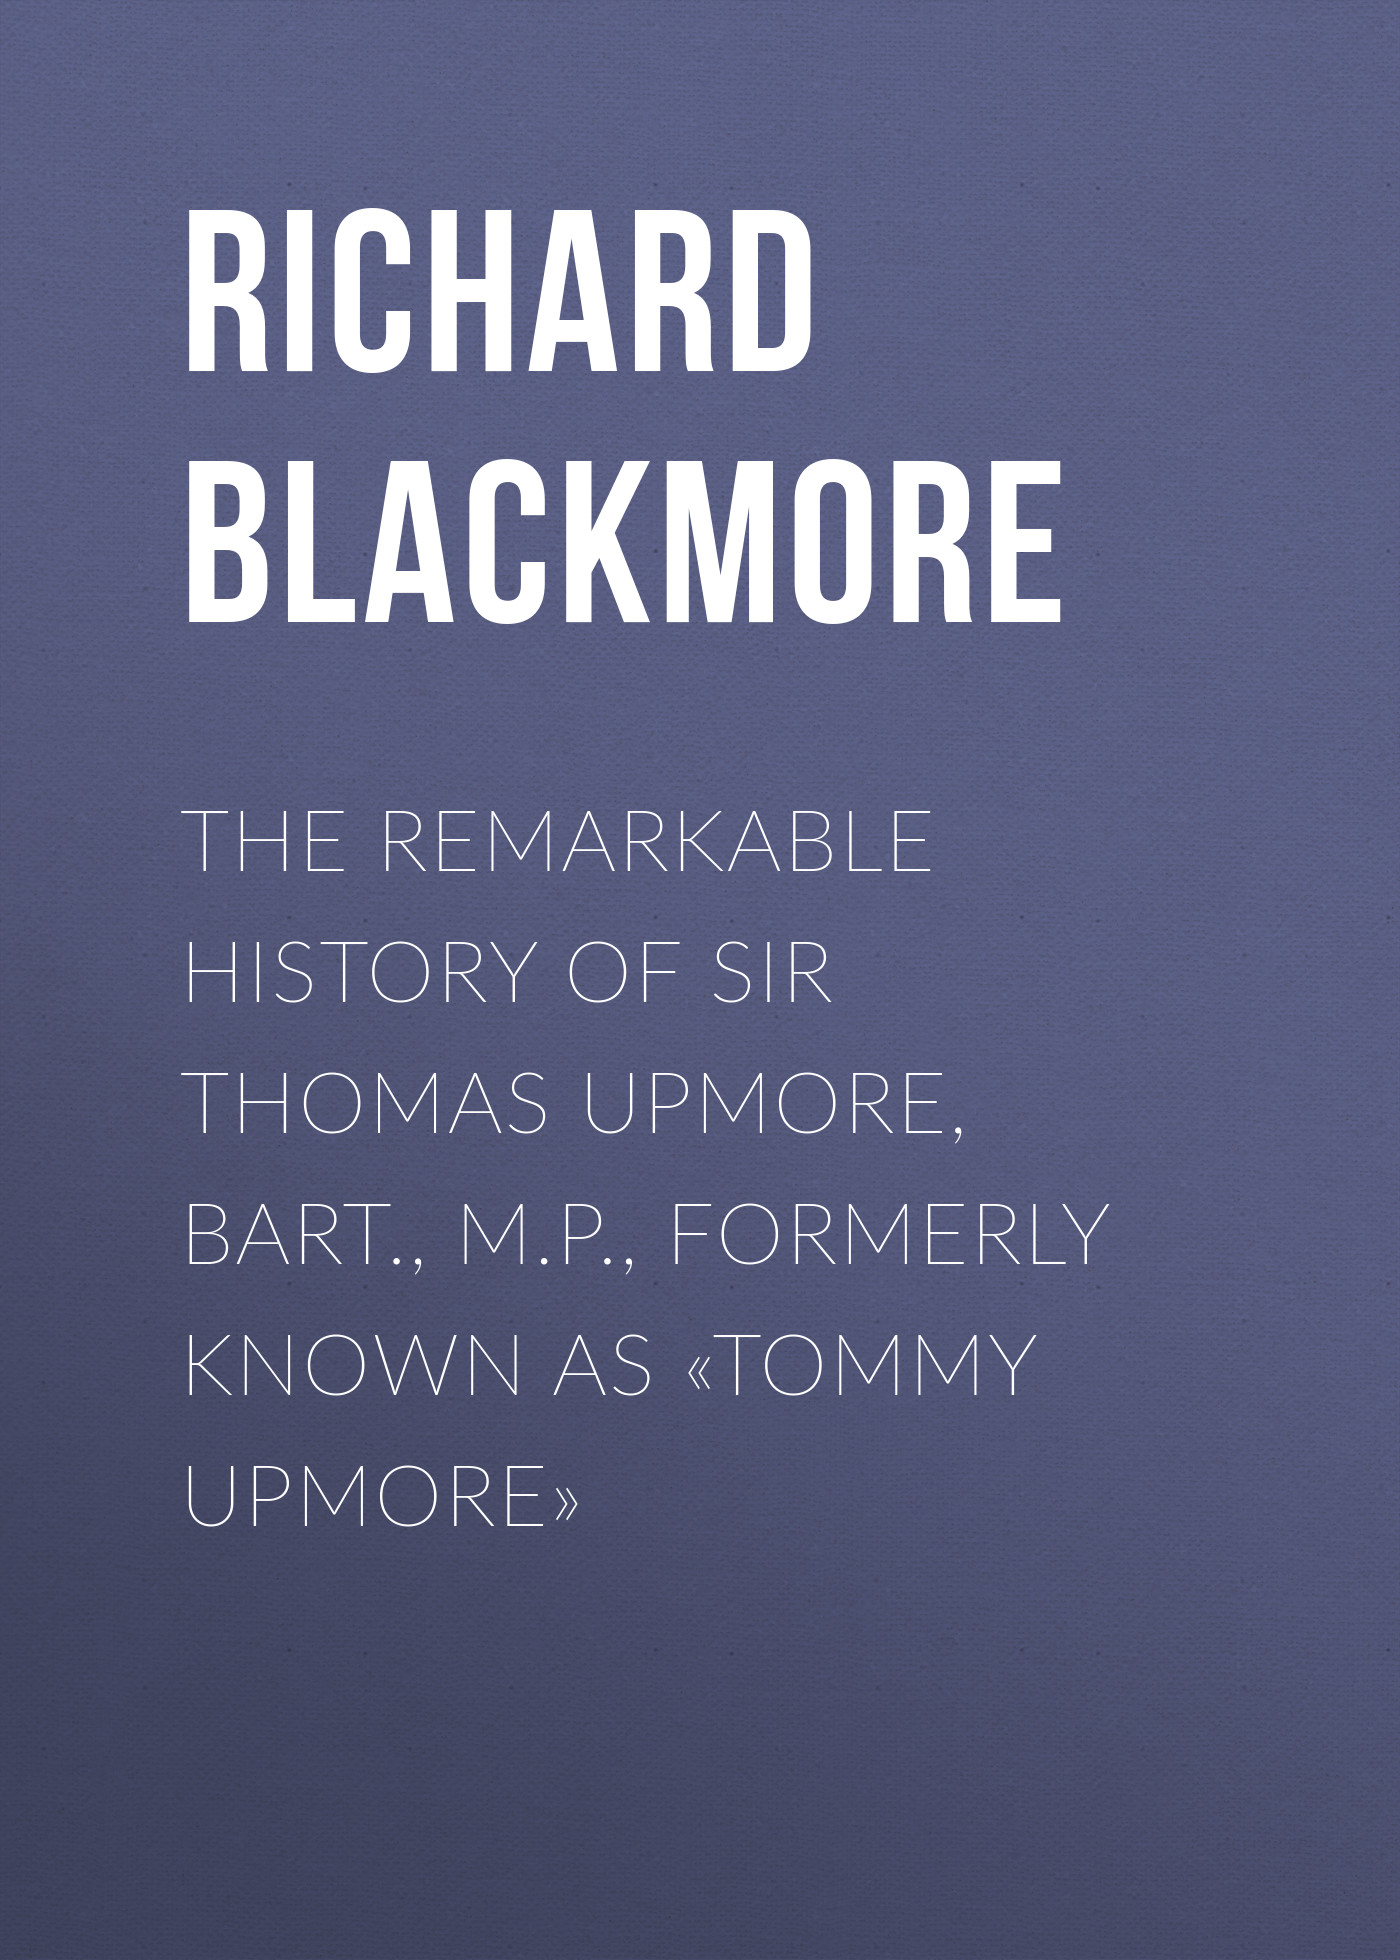 The Remarkable History of Sir Thomas Upmore, bart., M.P., formerly known as«Tommy Upmore»